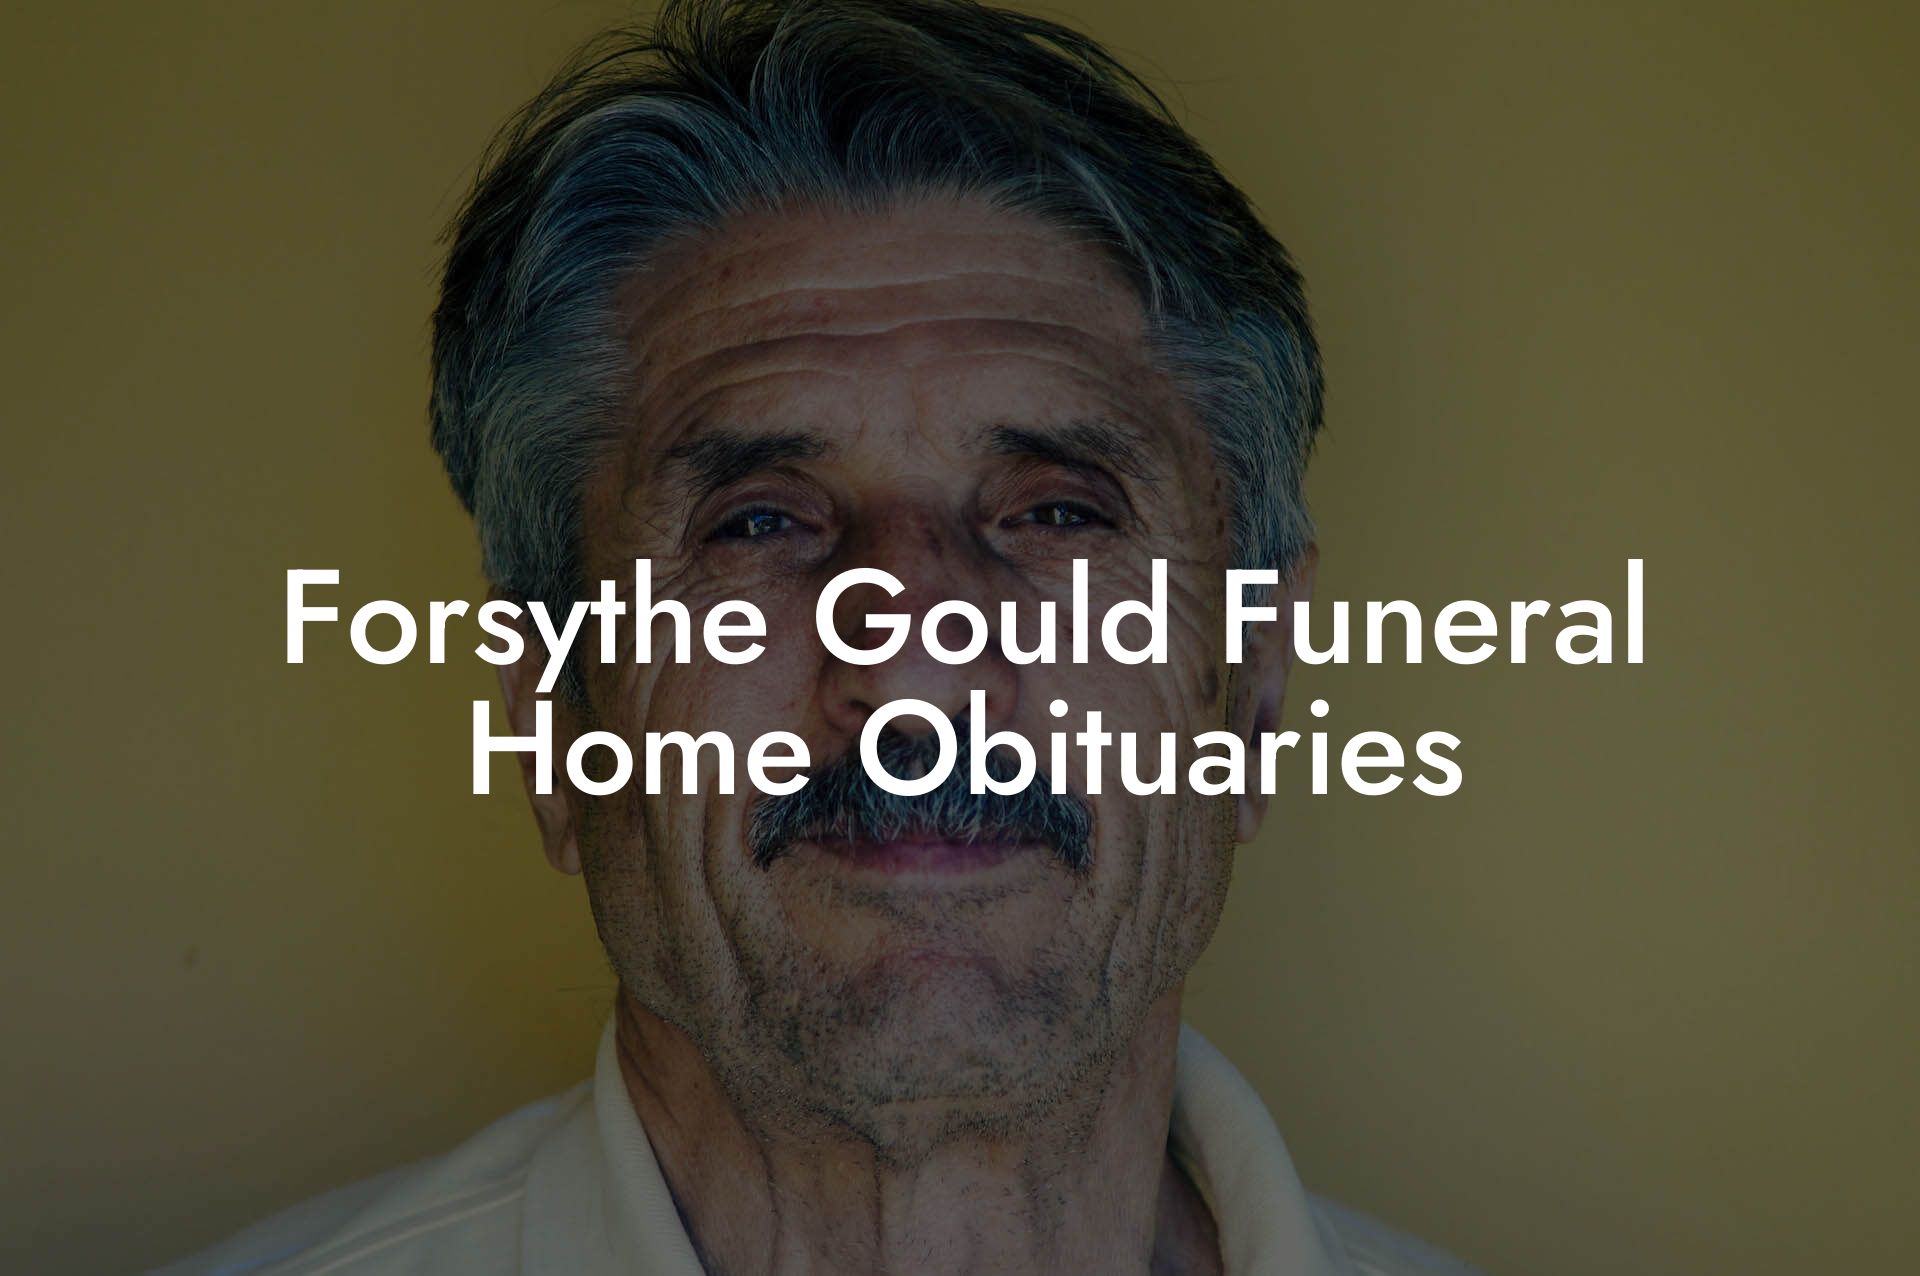 Forsythe Gould Funeral Home Obituaries